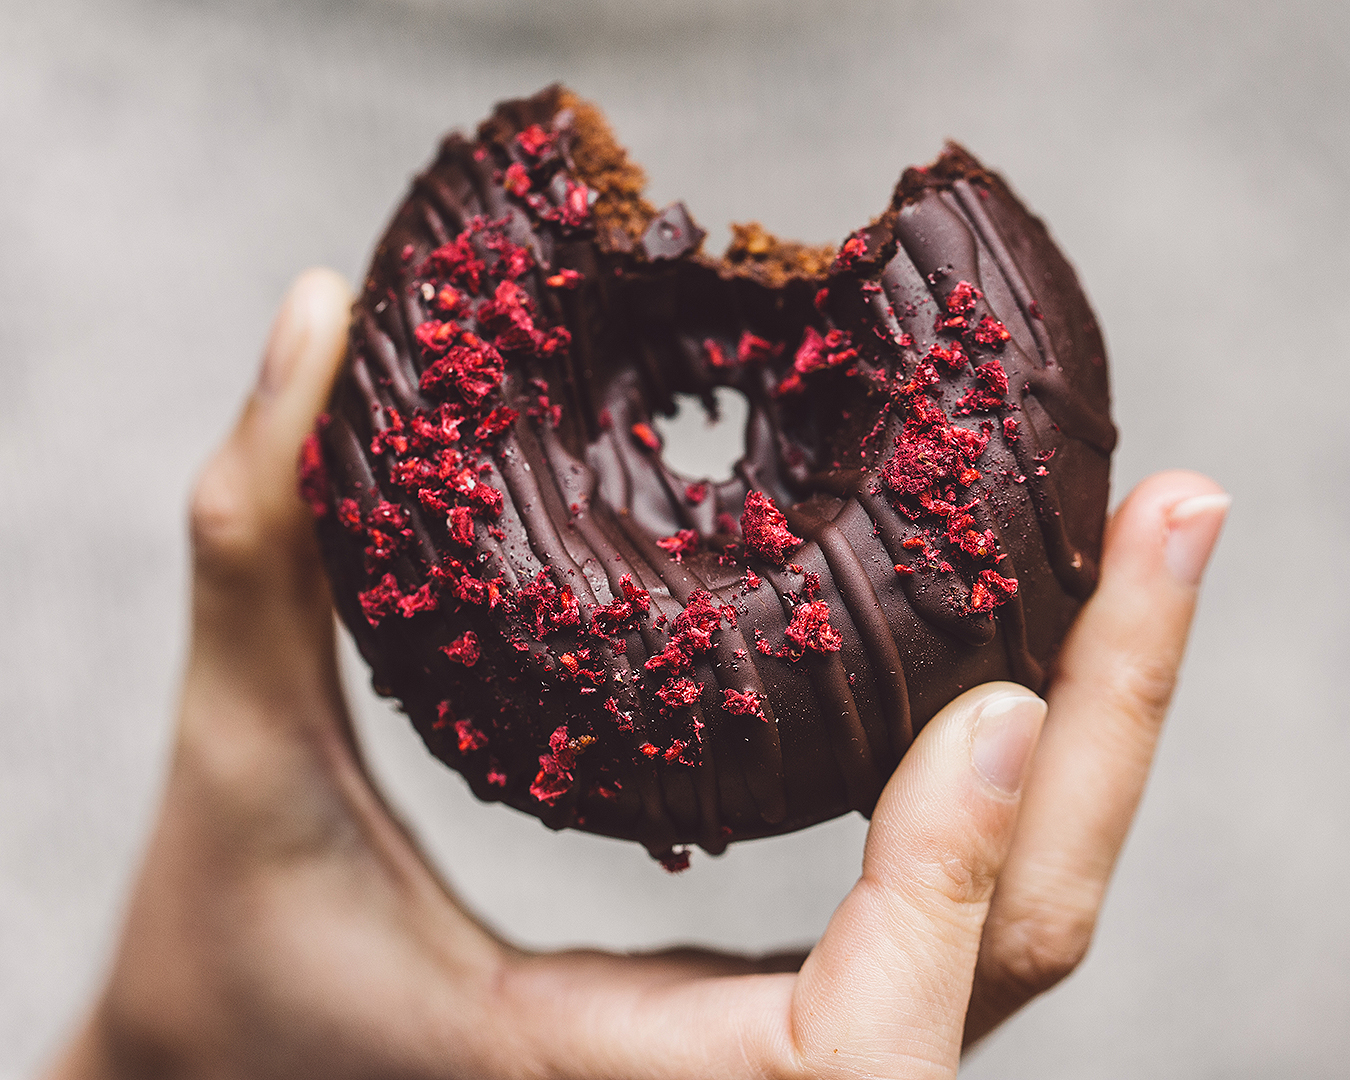 A delicious chocolate donut from Little Bird Organics